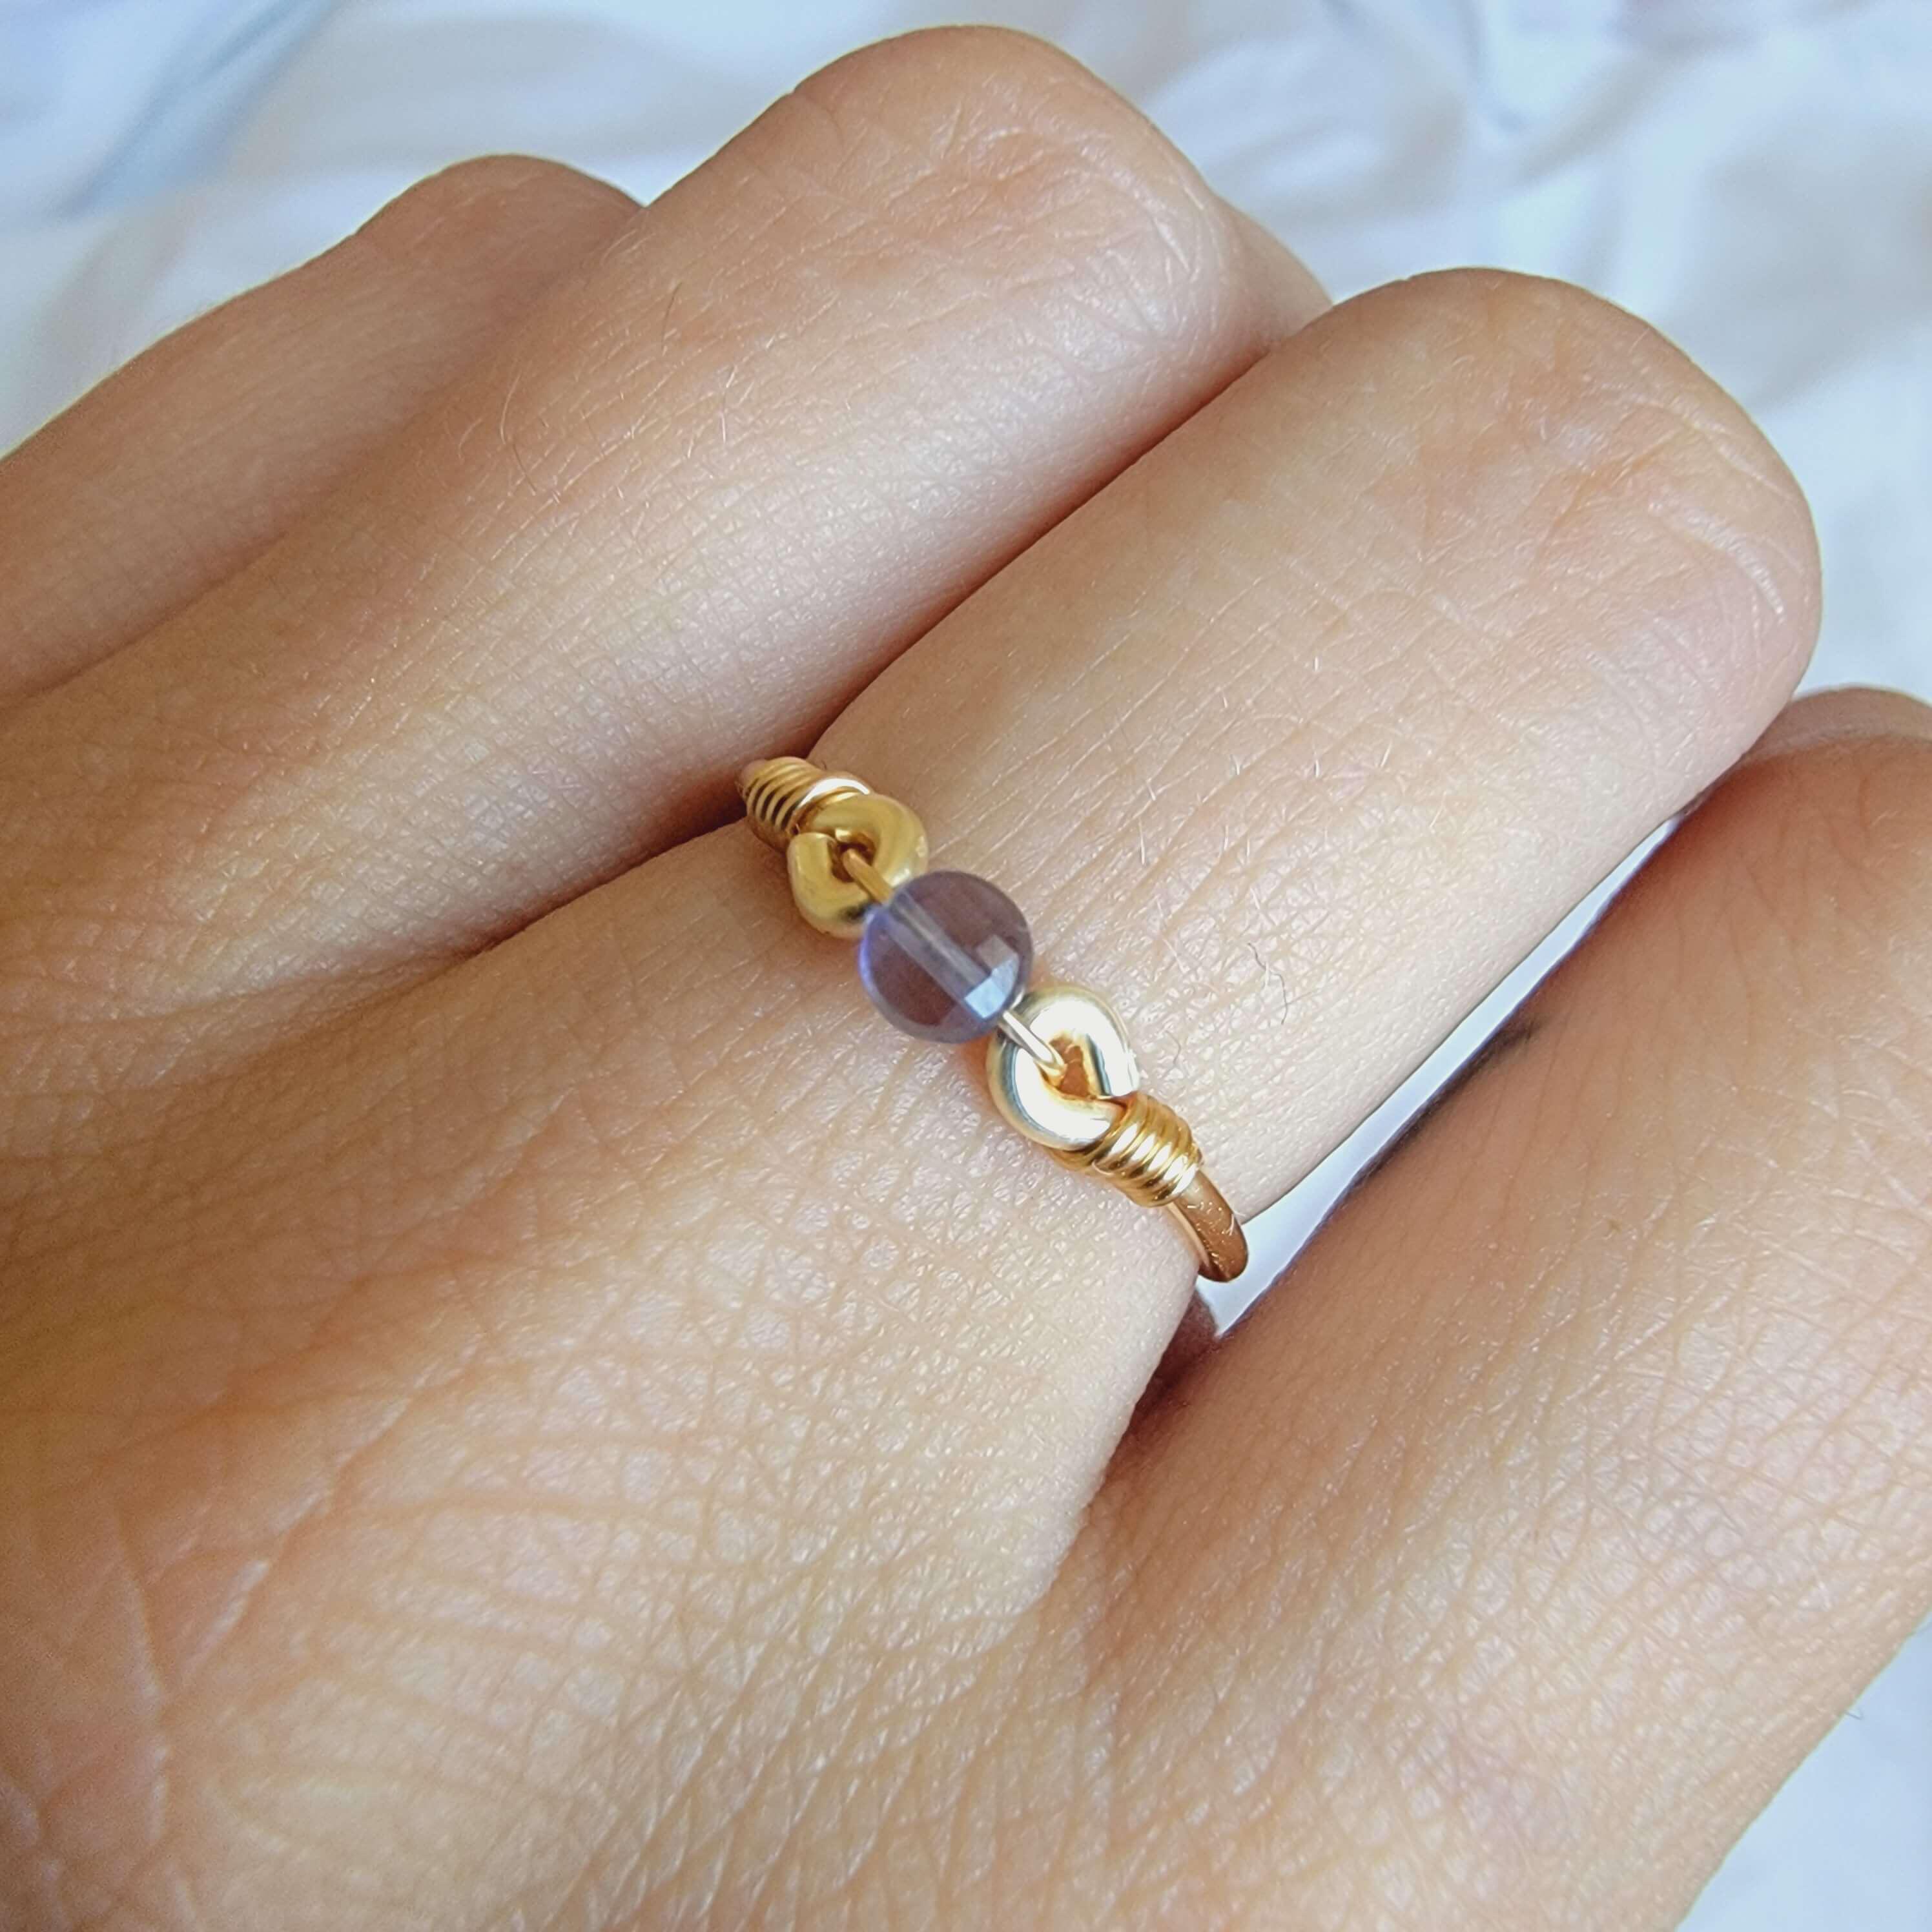 Jewelry :: Rings :: Stackable Rings :: Iolite 14k Gold Filled Ring • Petite  Faceted Coin Gemstone • Handmade Wire Wrapped Jewelry